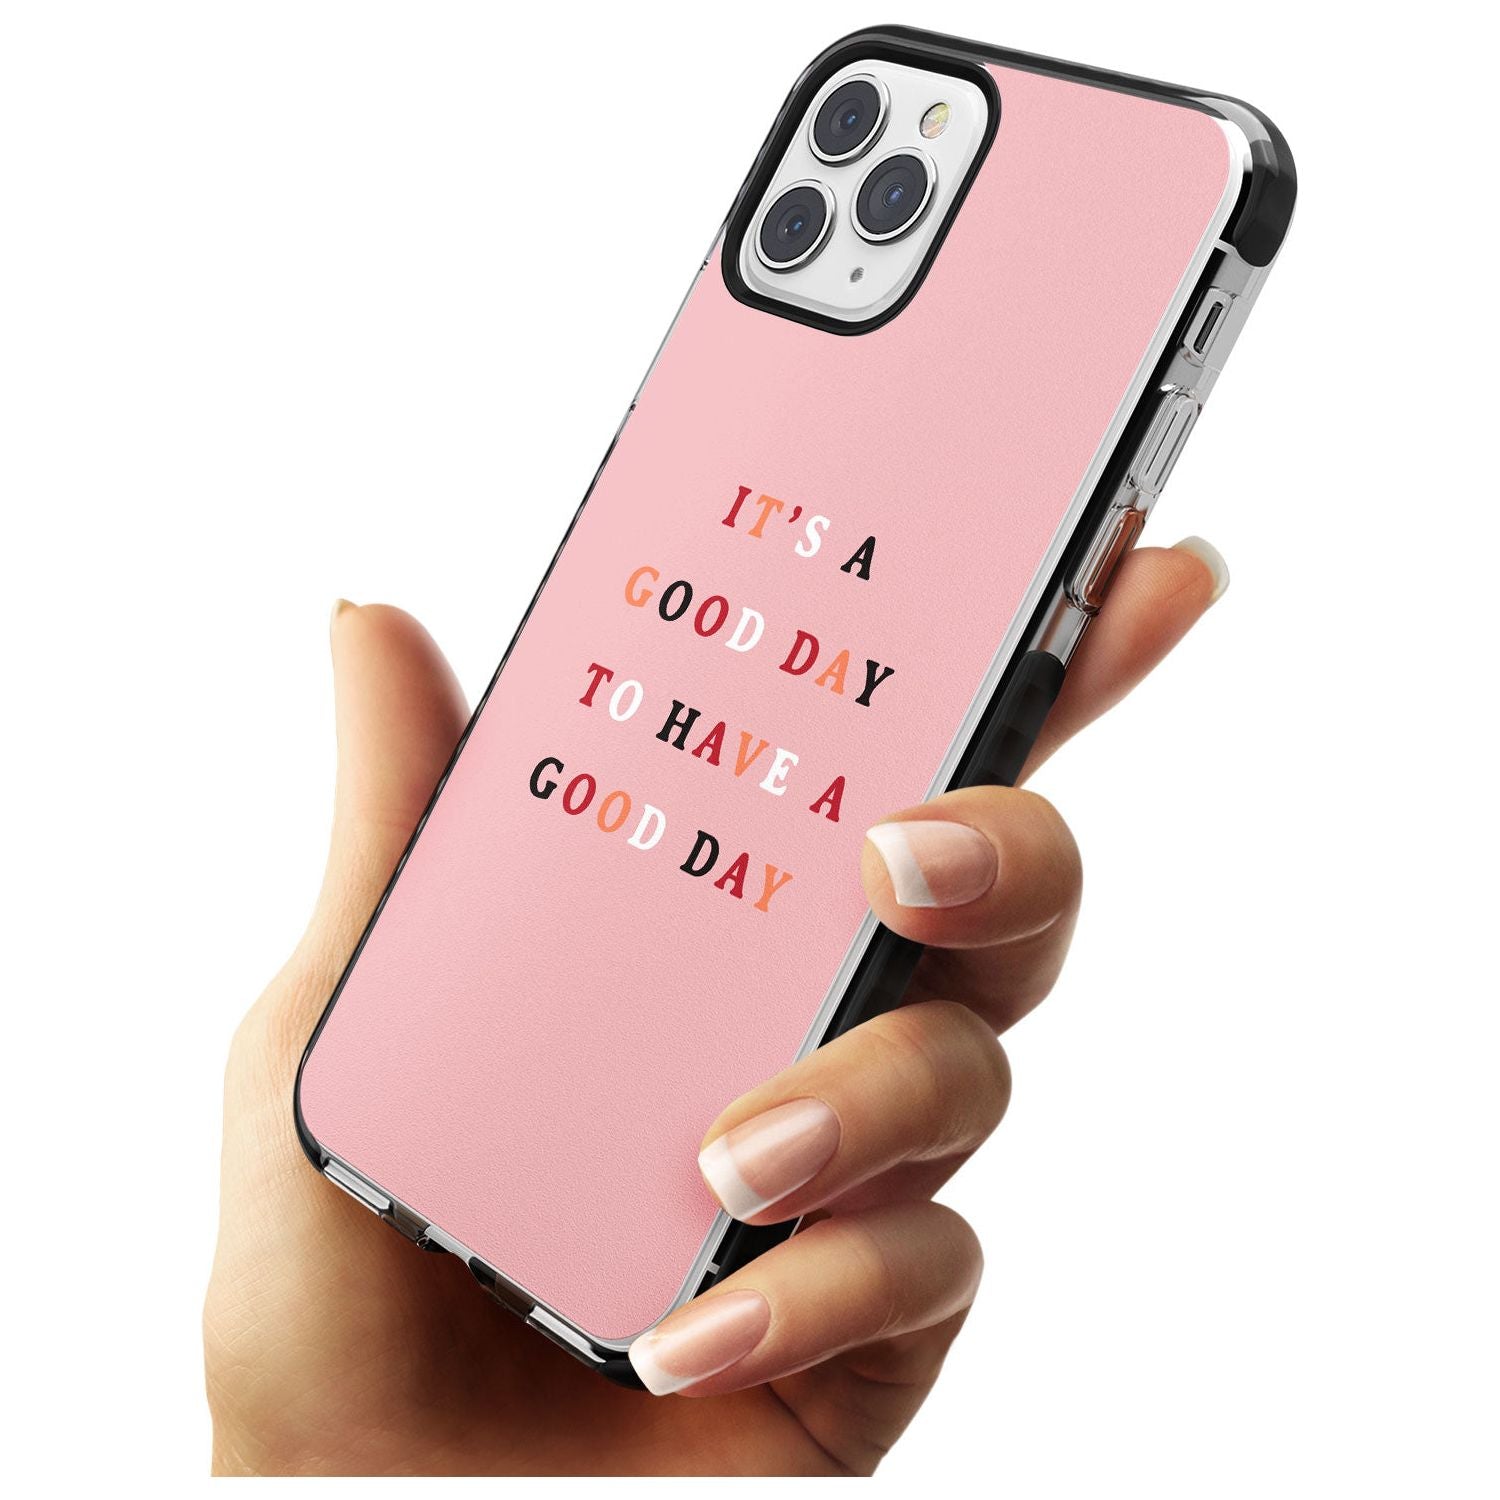 It's a good day to have a good day Black Impact Phone Case for iPhone 11 Pro Max